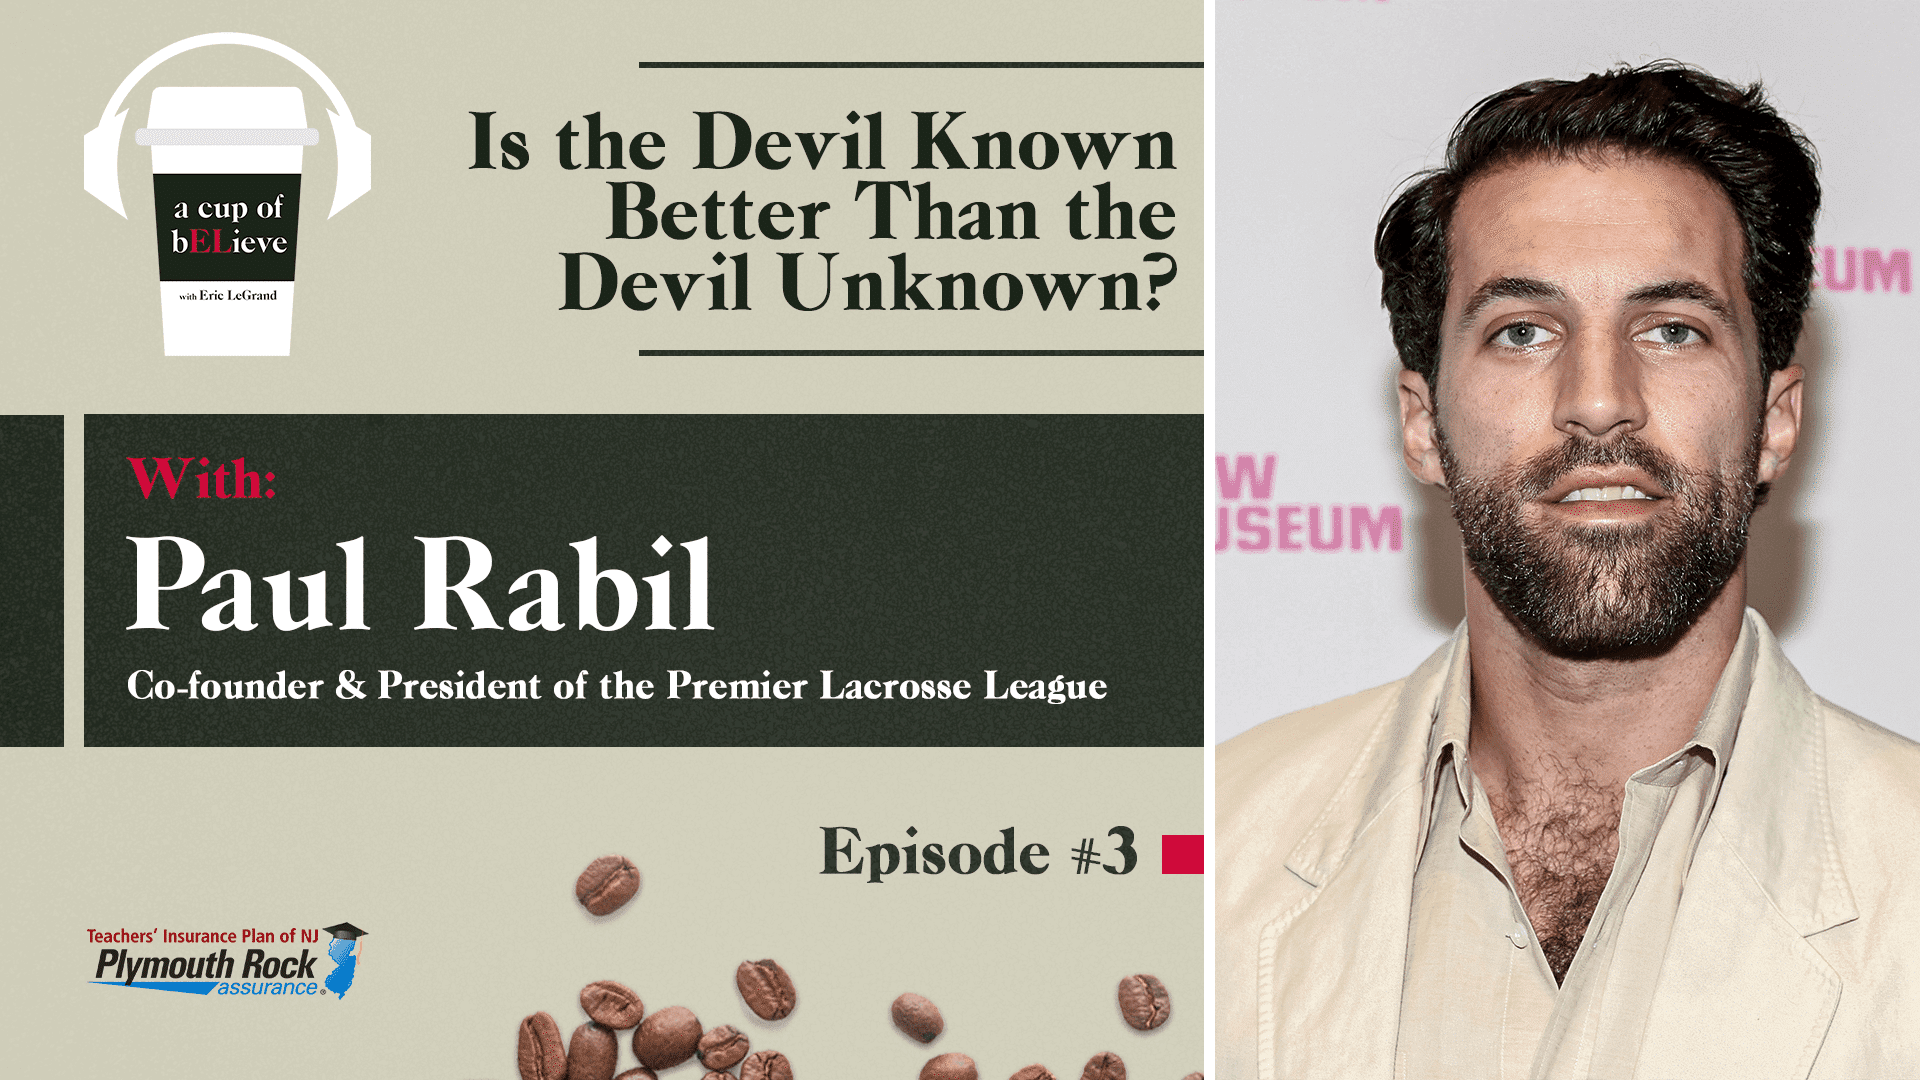 Paul Rabil Co-founder and President of the Premier Lacrosse League, Retired Pro Athlete